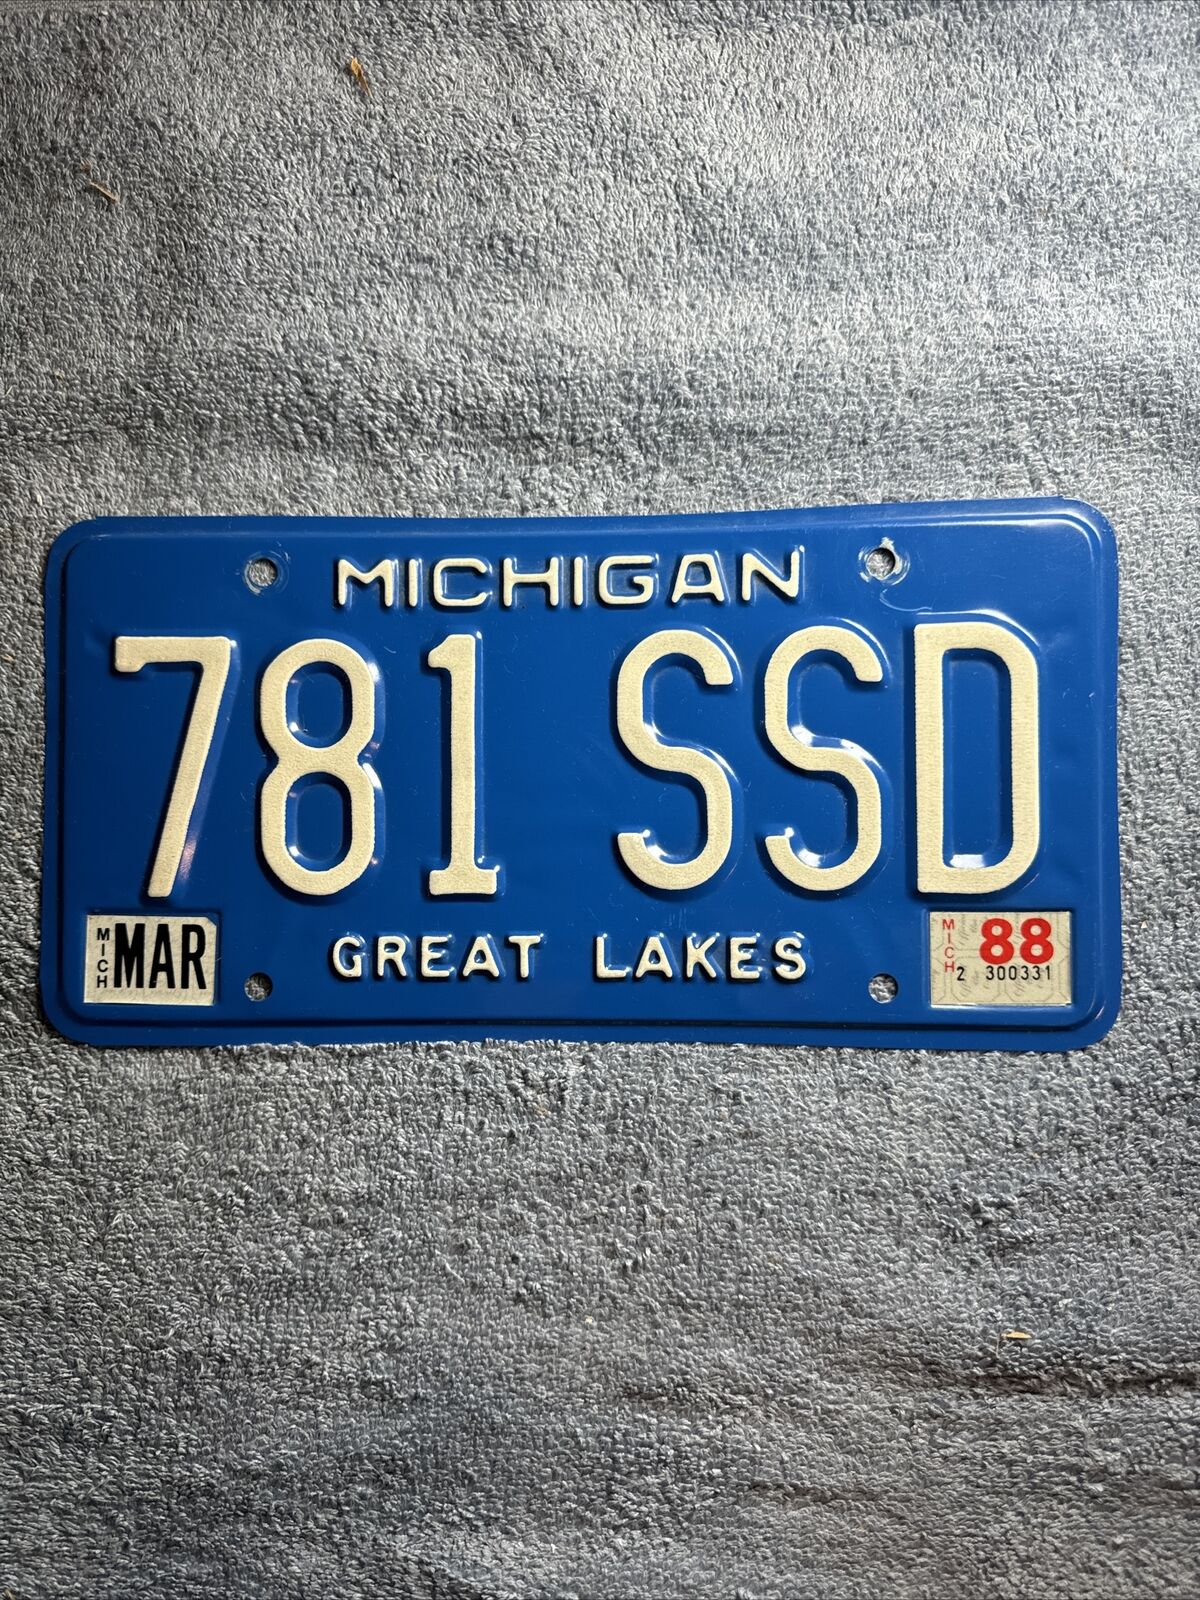 1988 Michigan License Plate 781 SSD Great Lakes